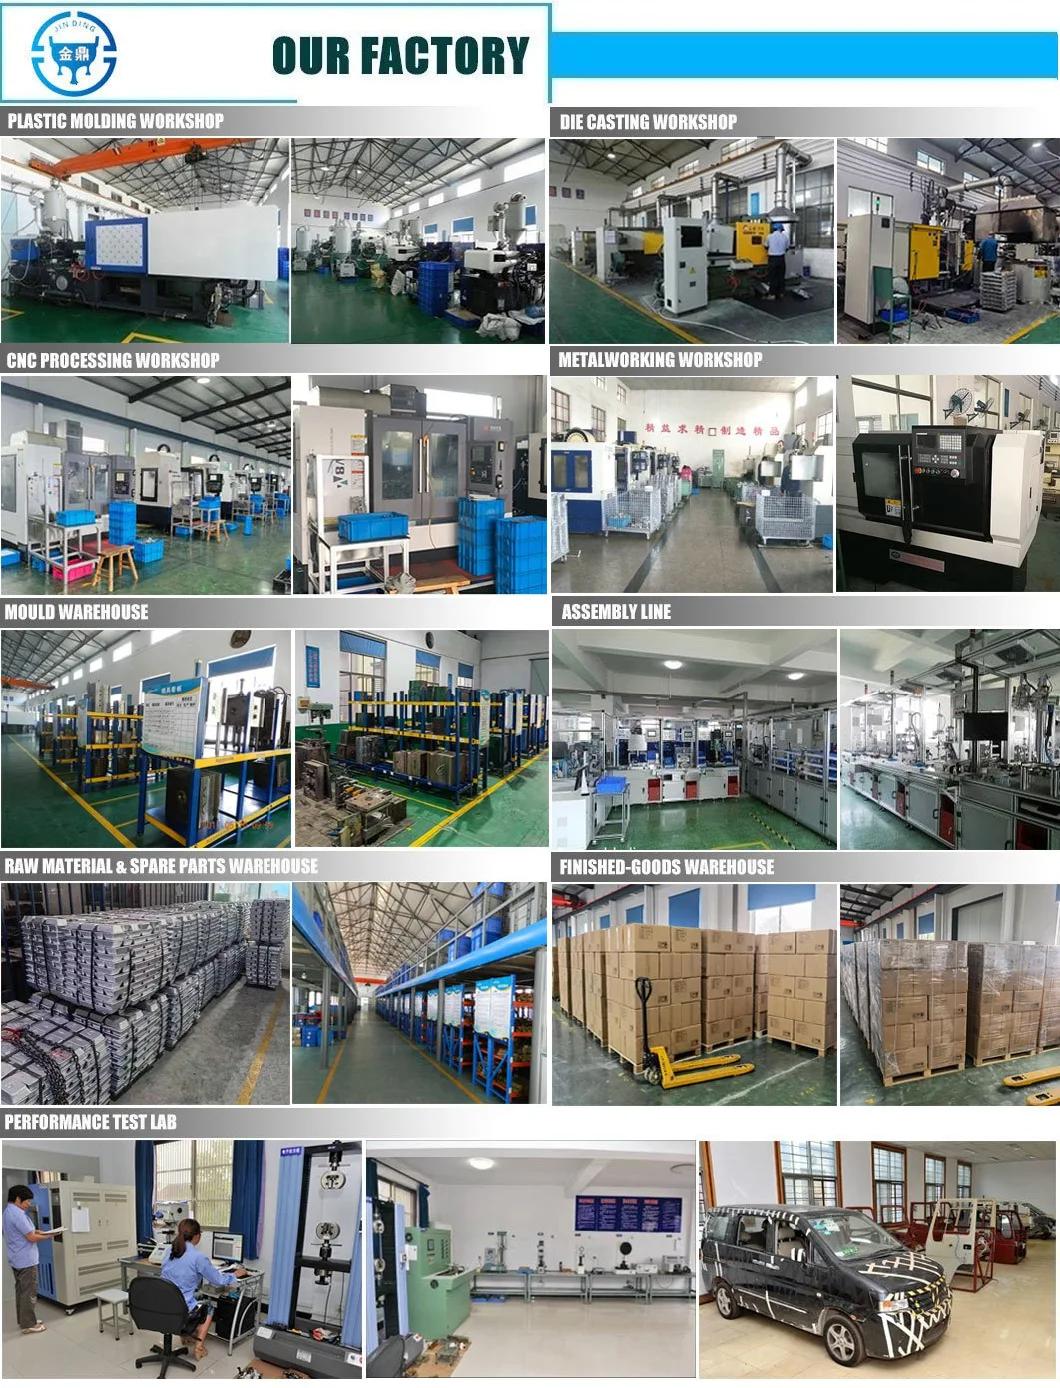 High Quality Customized Die Casting Tooling for Car/Truck/Lock/Housing